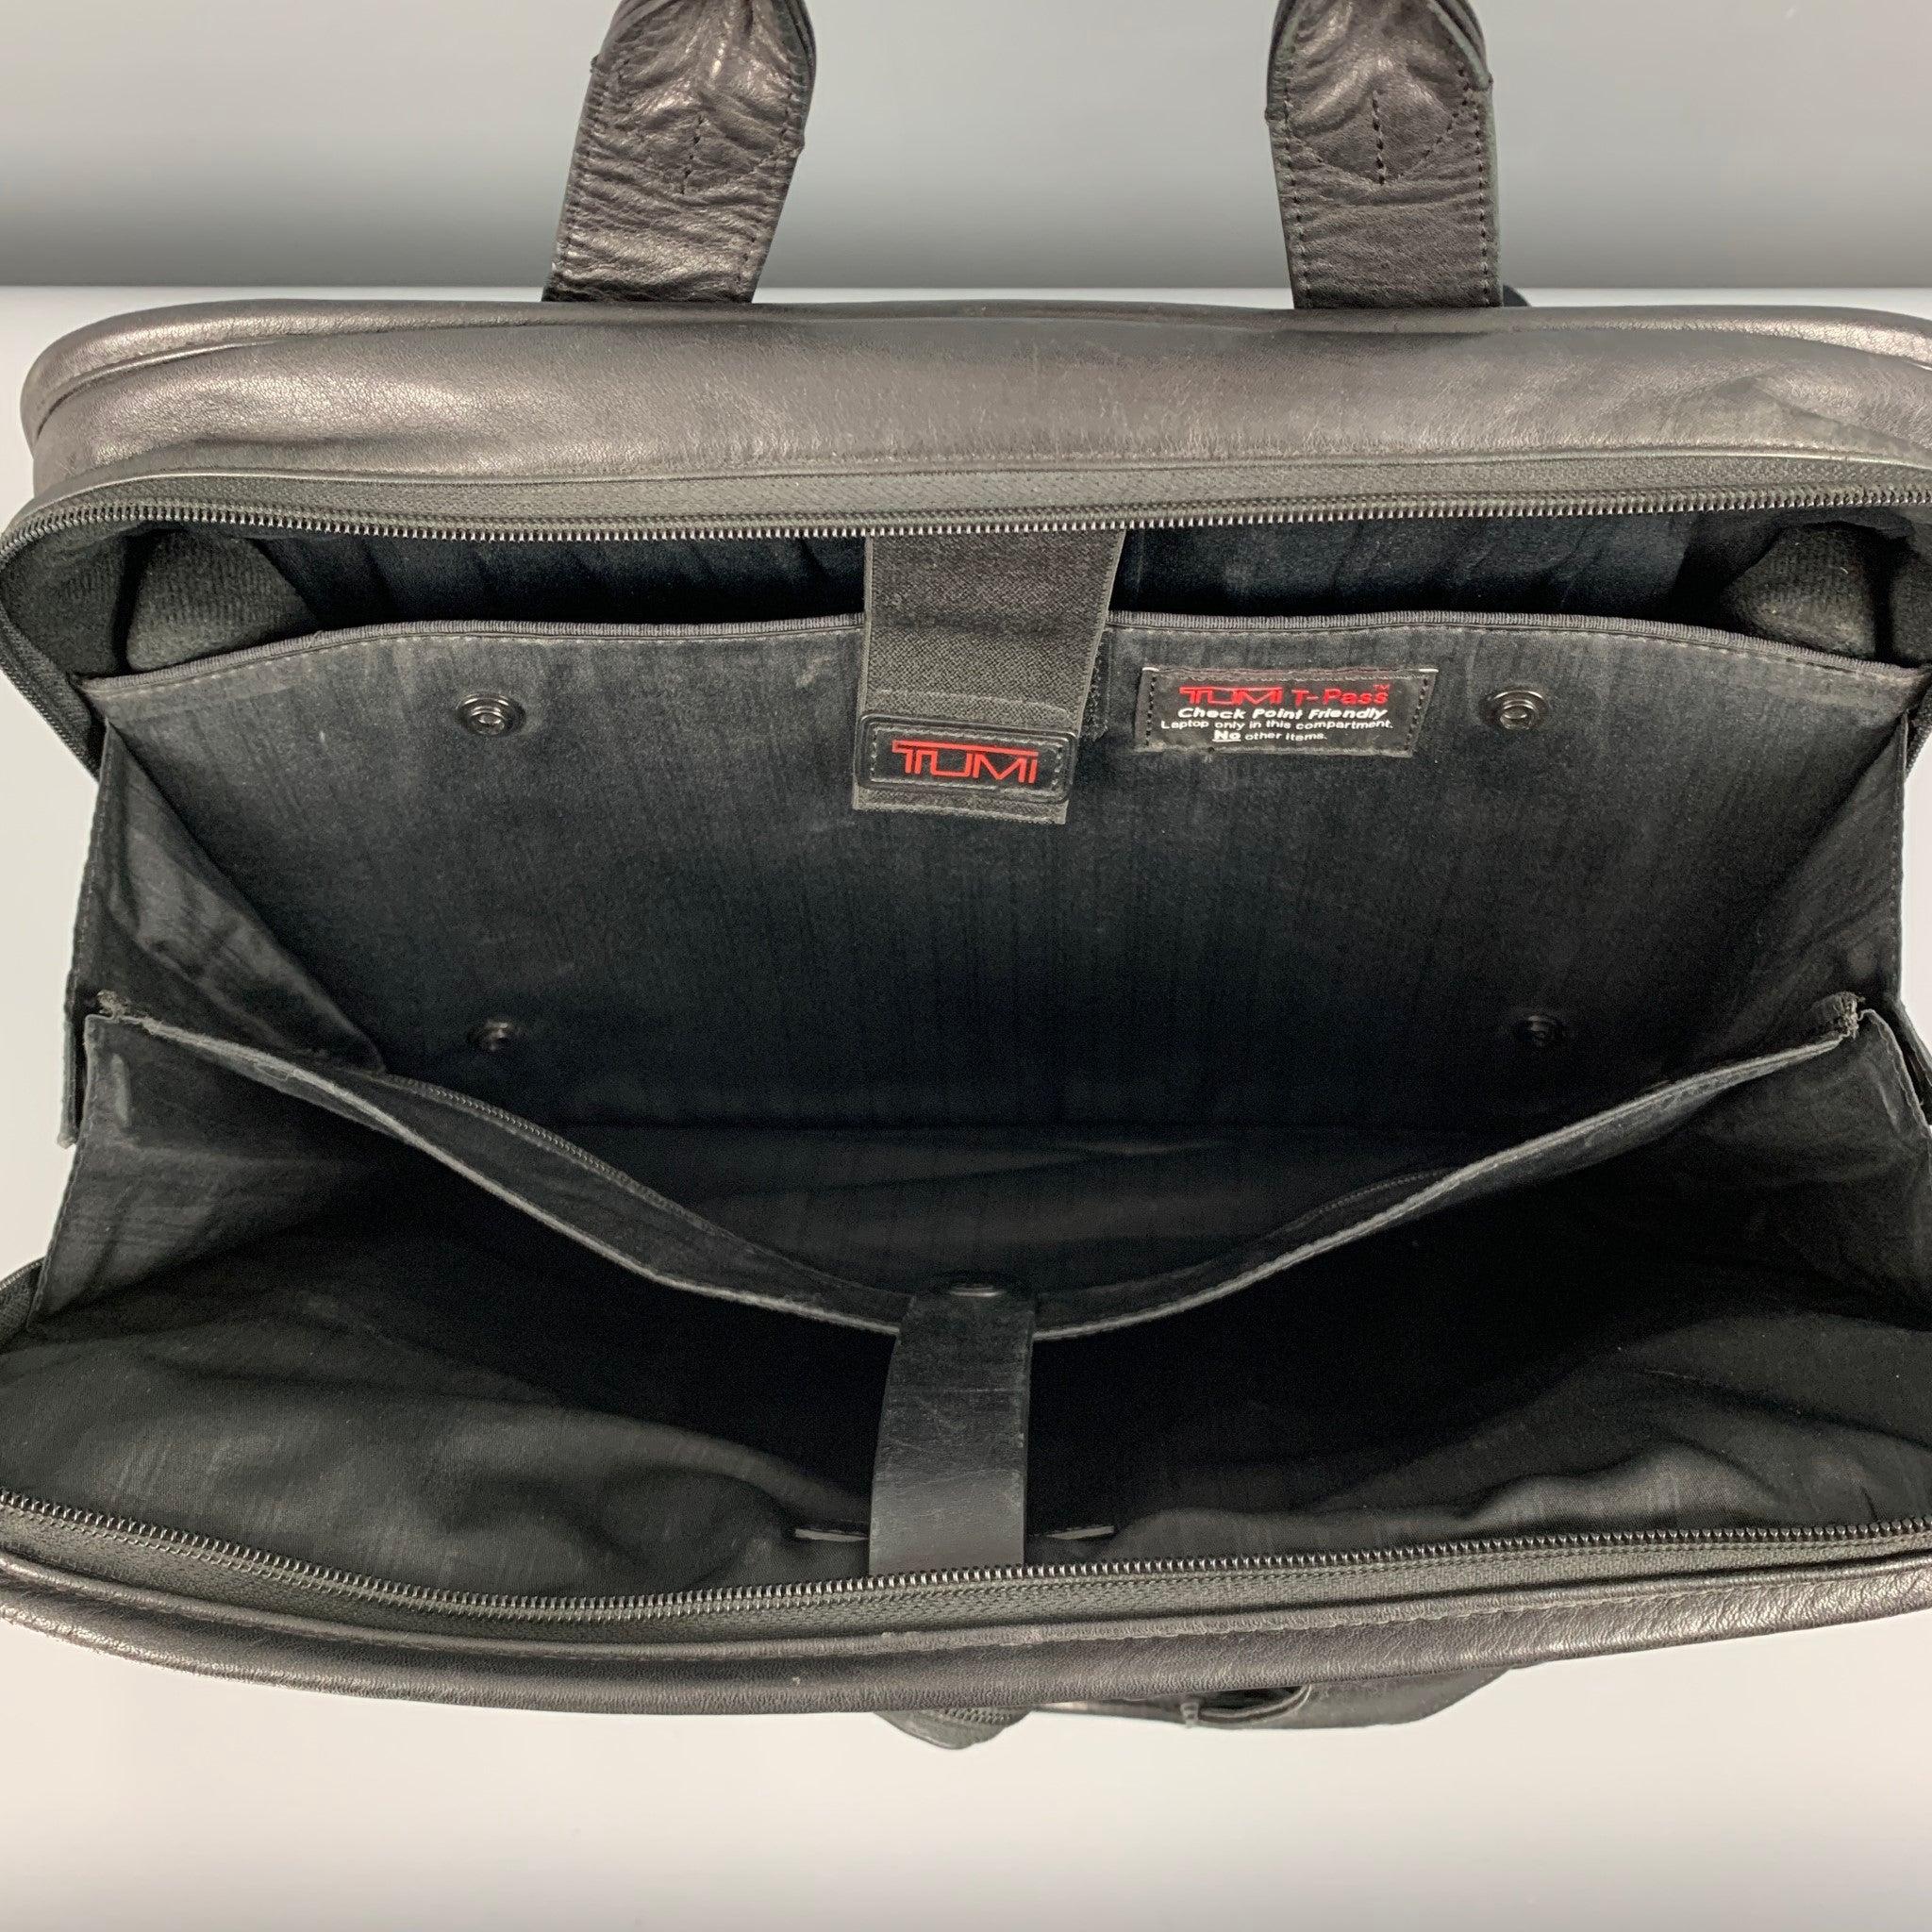 TUMI Grey Leather Briefcase Bag For Sale 4